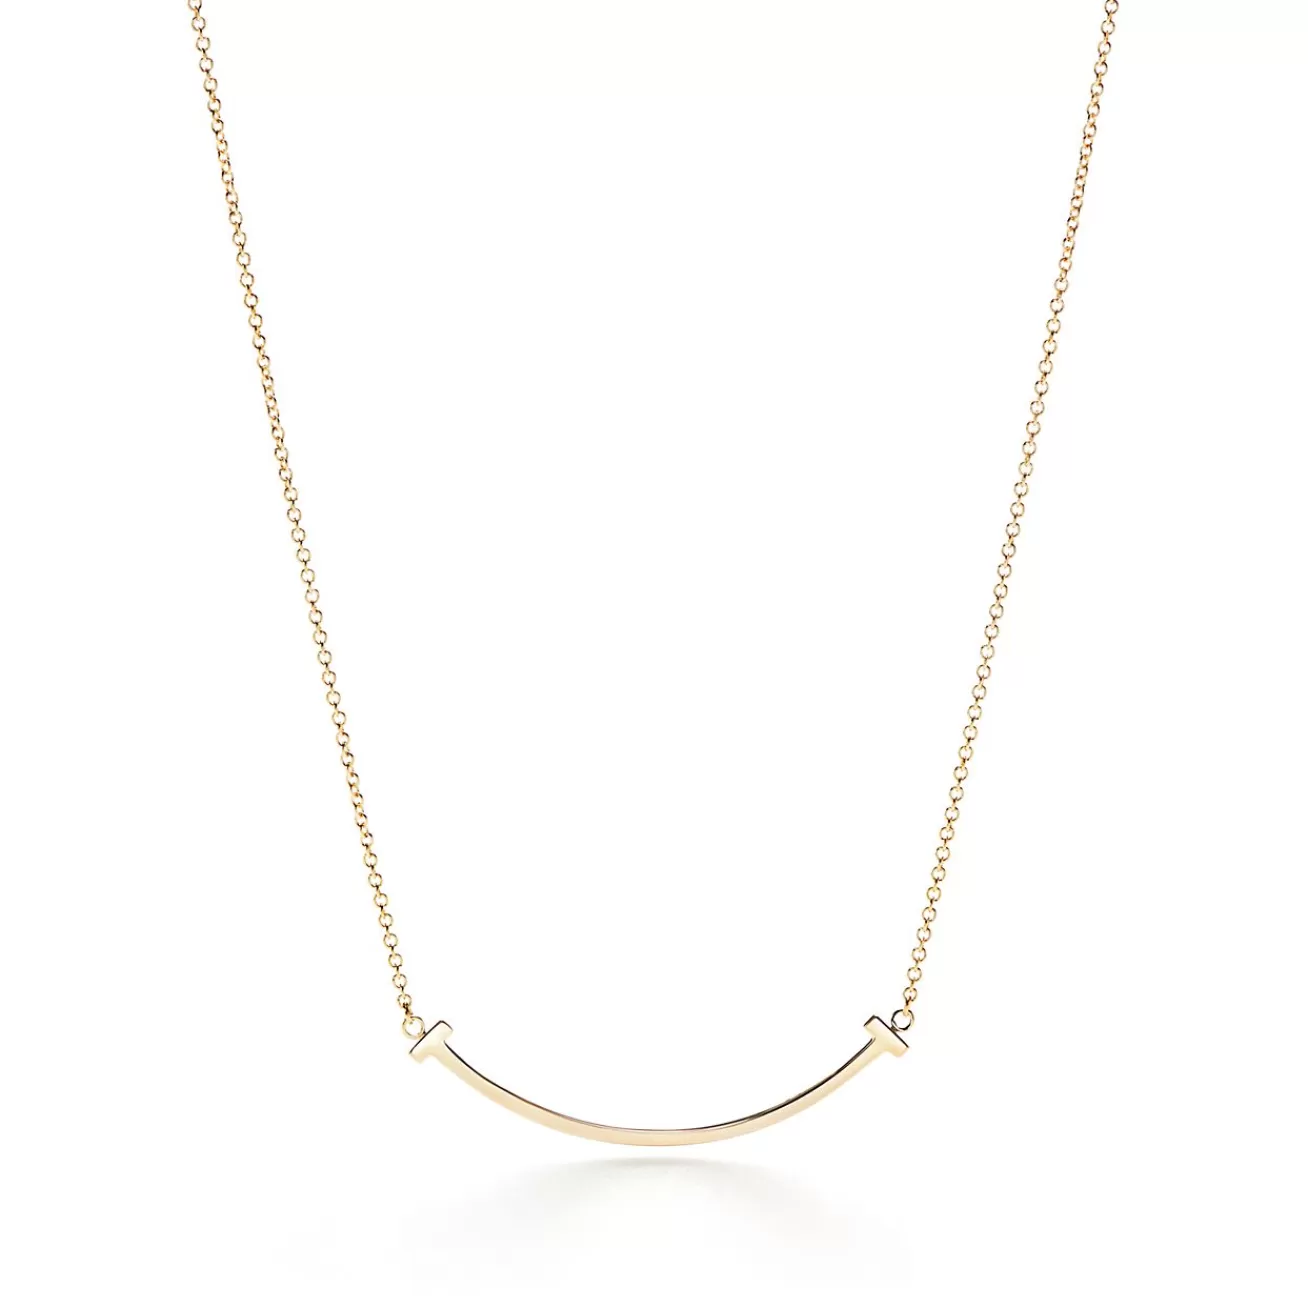 Tiffany & Co. Tiffany T Smile Pendant in Yellow Gold, Small | ^ Necklaces & Pendants | Men's Jewelry